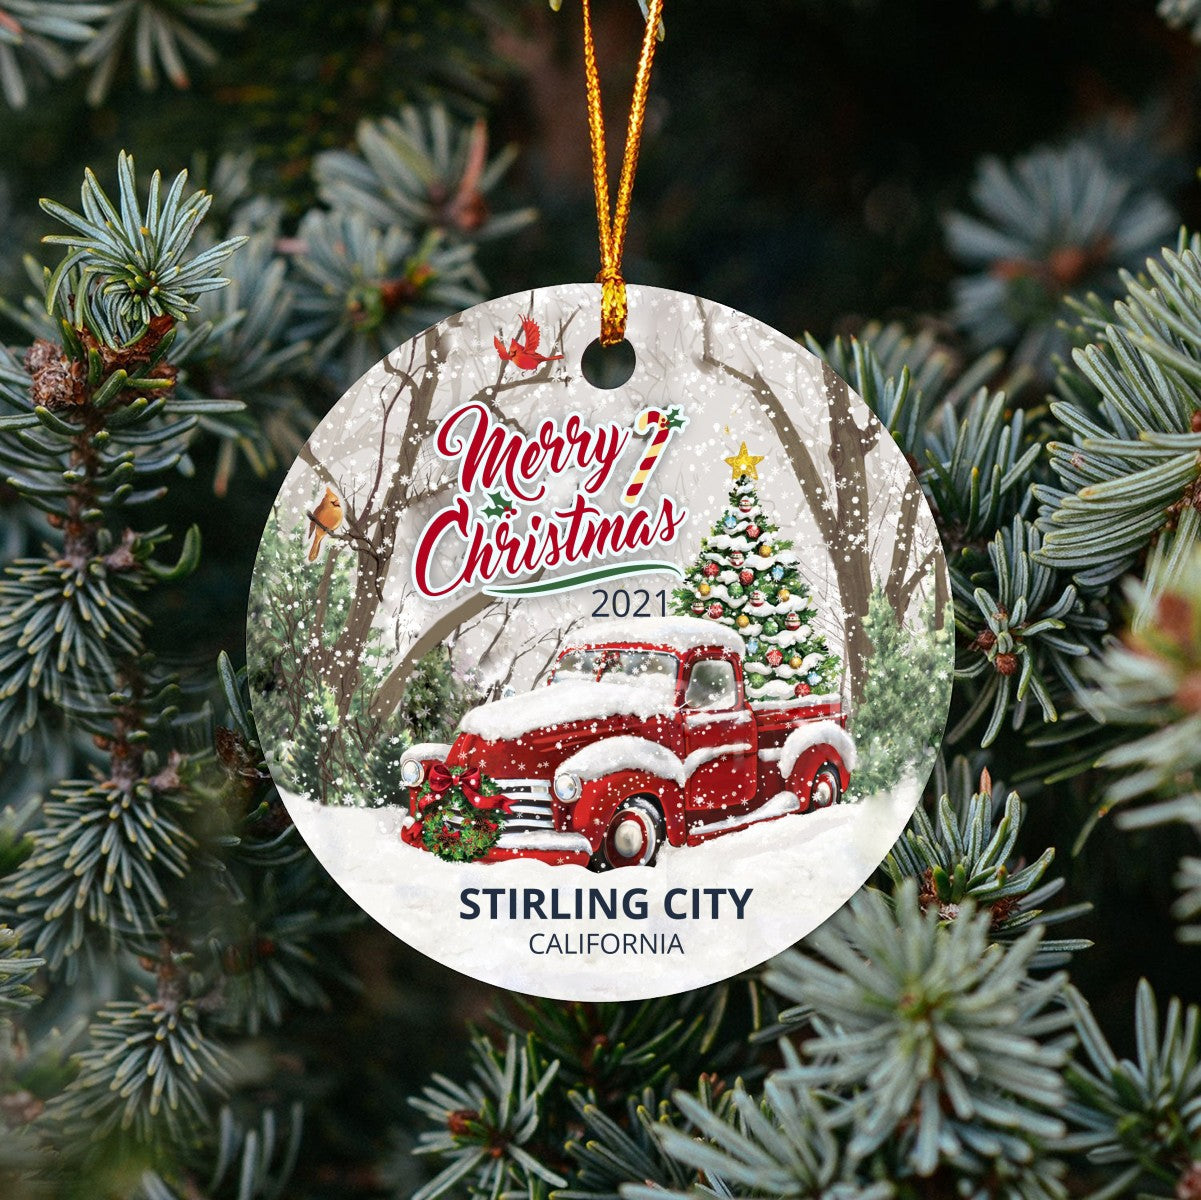 Christmas Tree Ornaments Stirling City - Ornament With Name City, State Stirling City California CA Ornament - Red Truck Xmas Ornaments 3'' Plastic Gift For Family, Friend And Housewarming